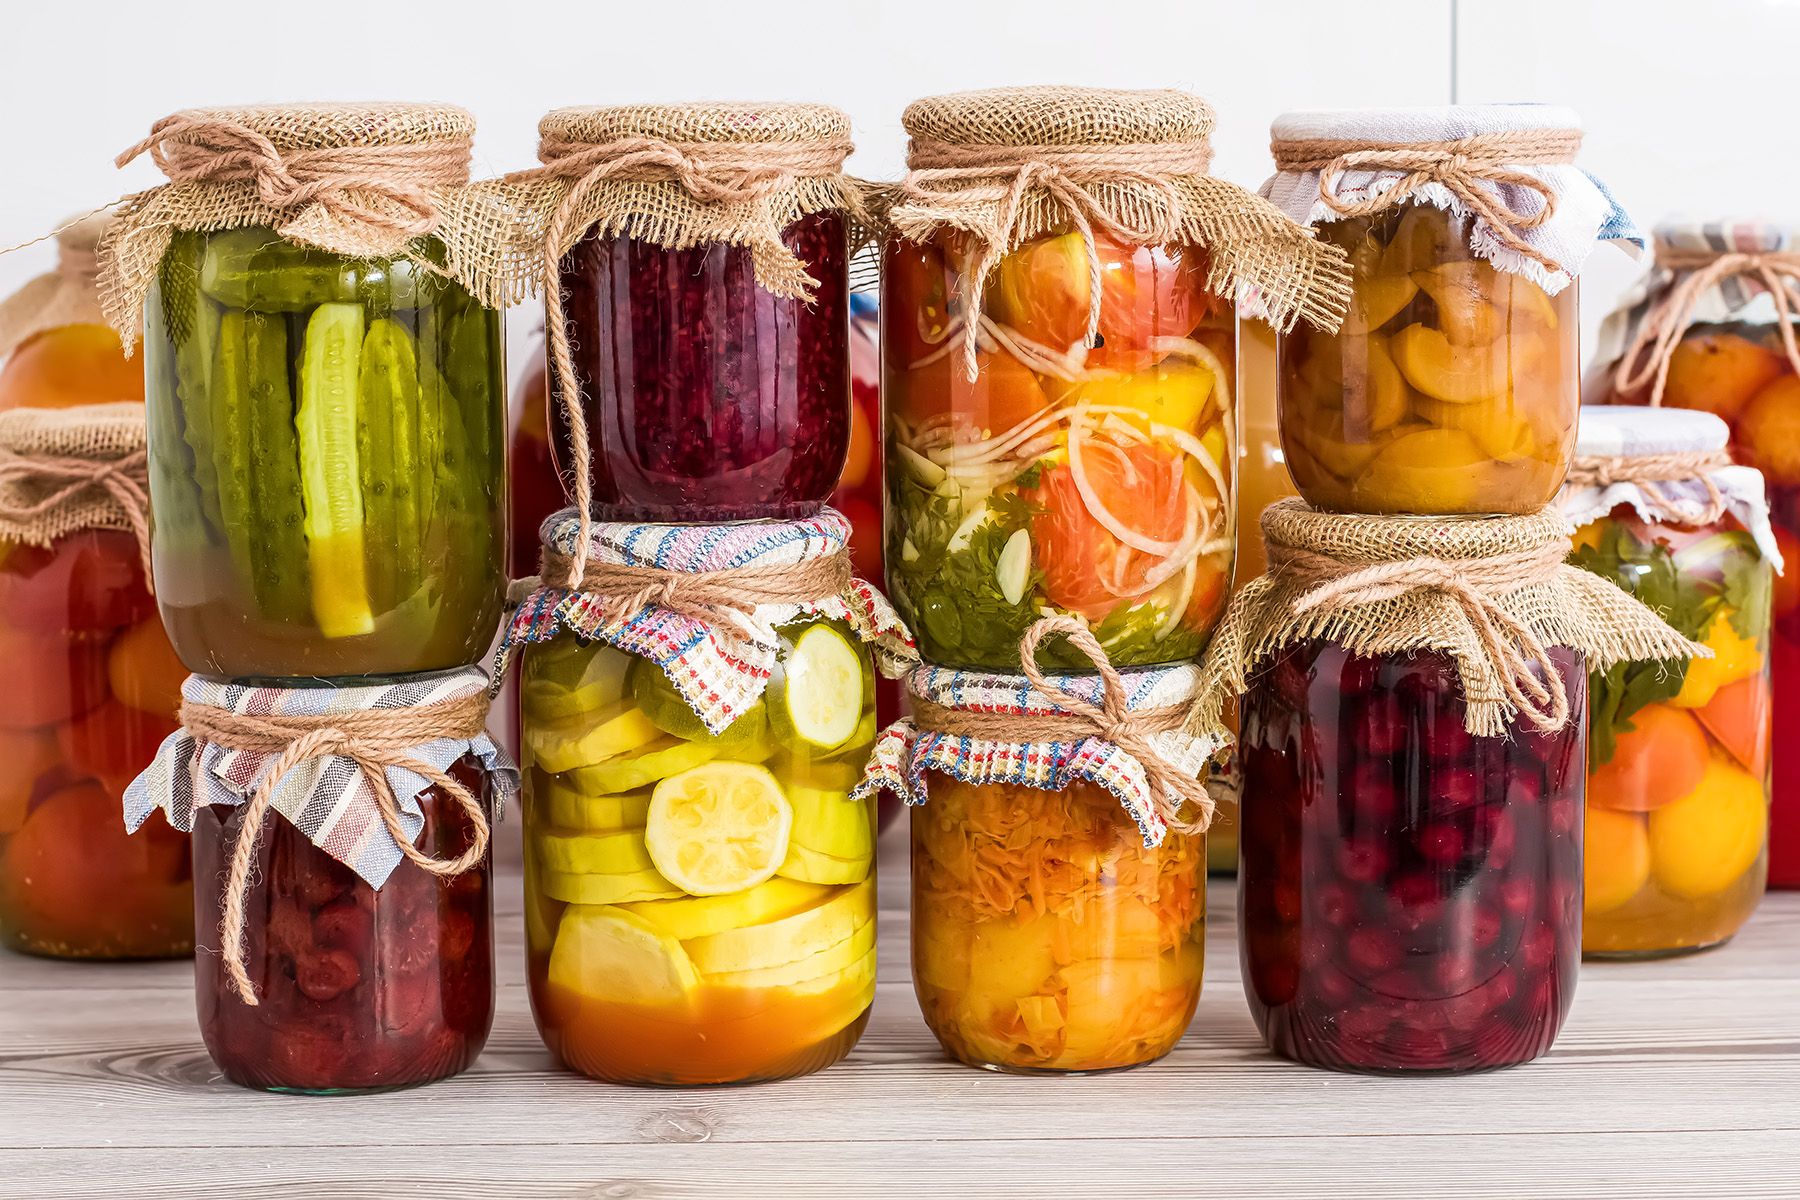 pickled cucumbers, lemons, and fruits for use in sandwiches